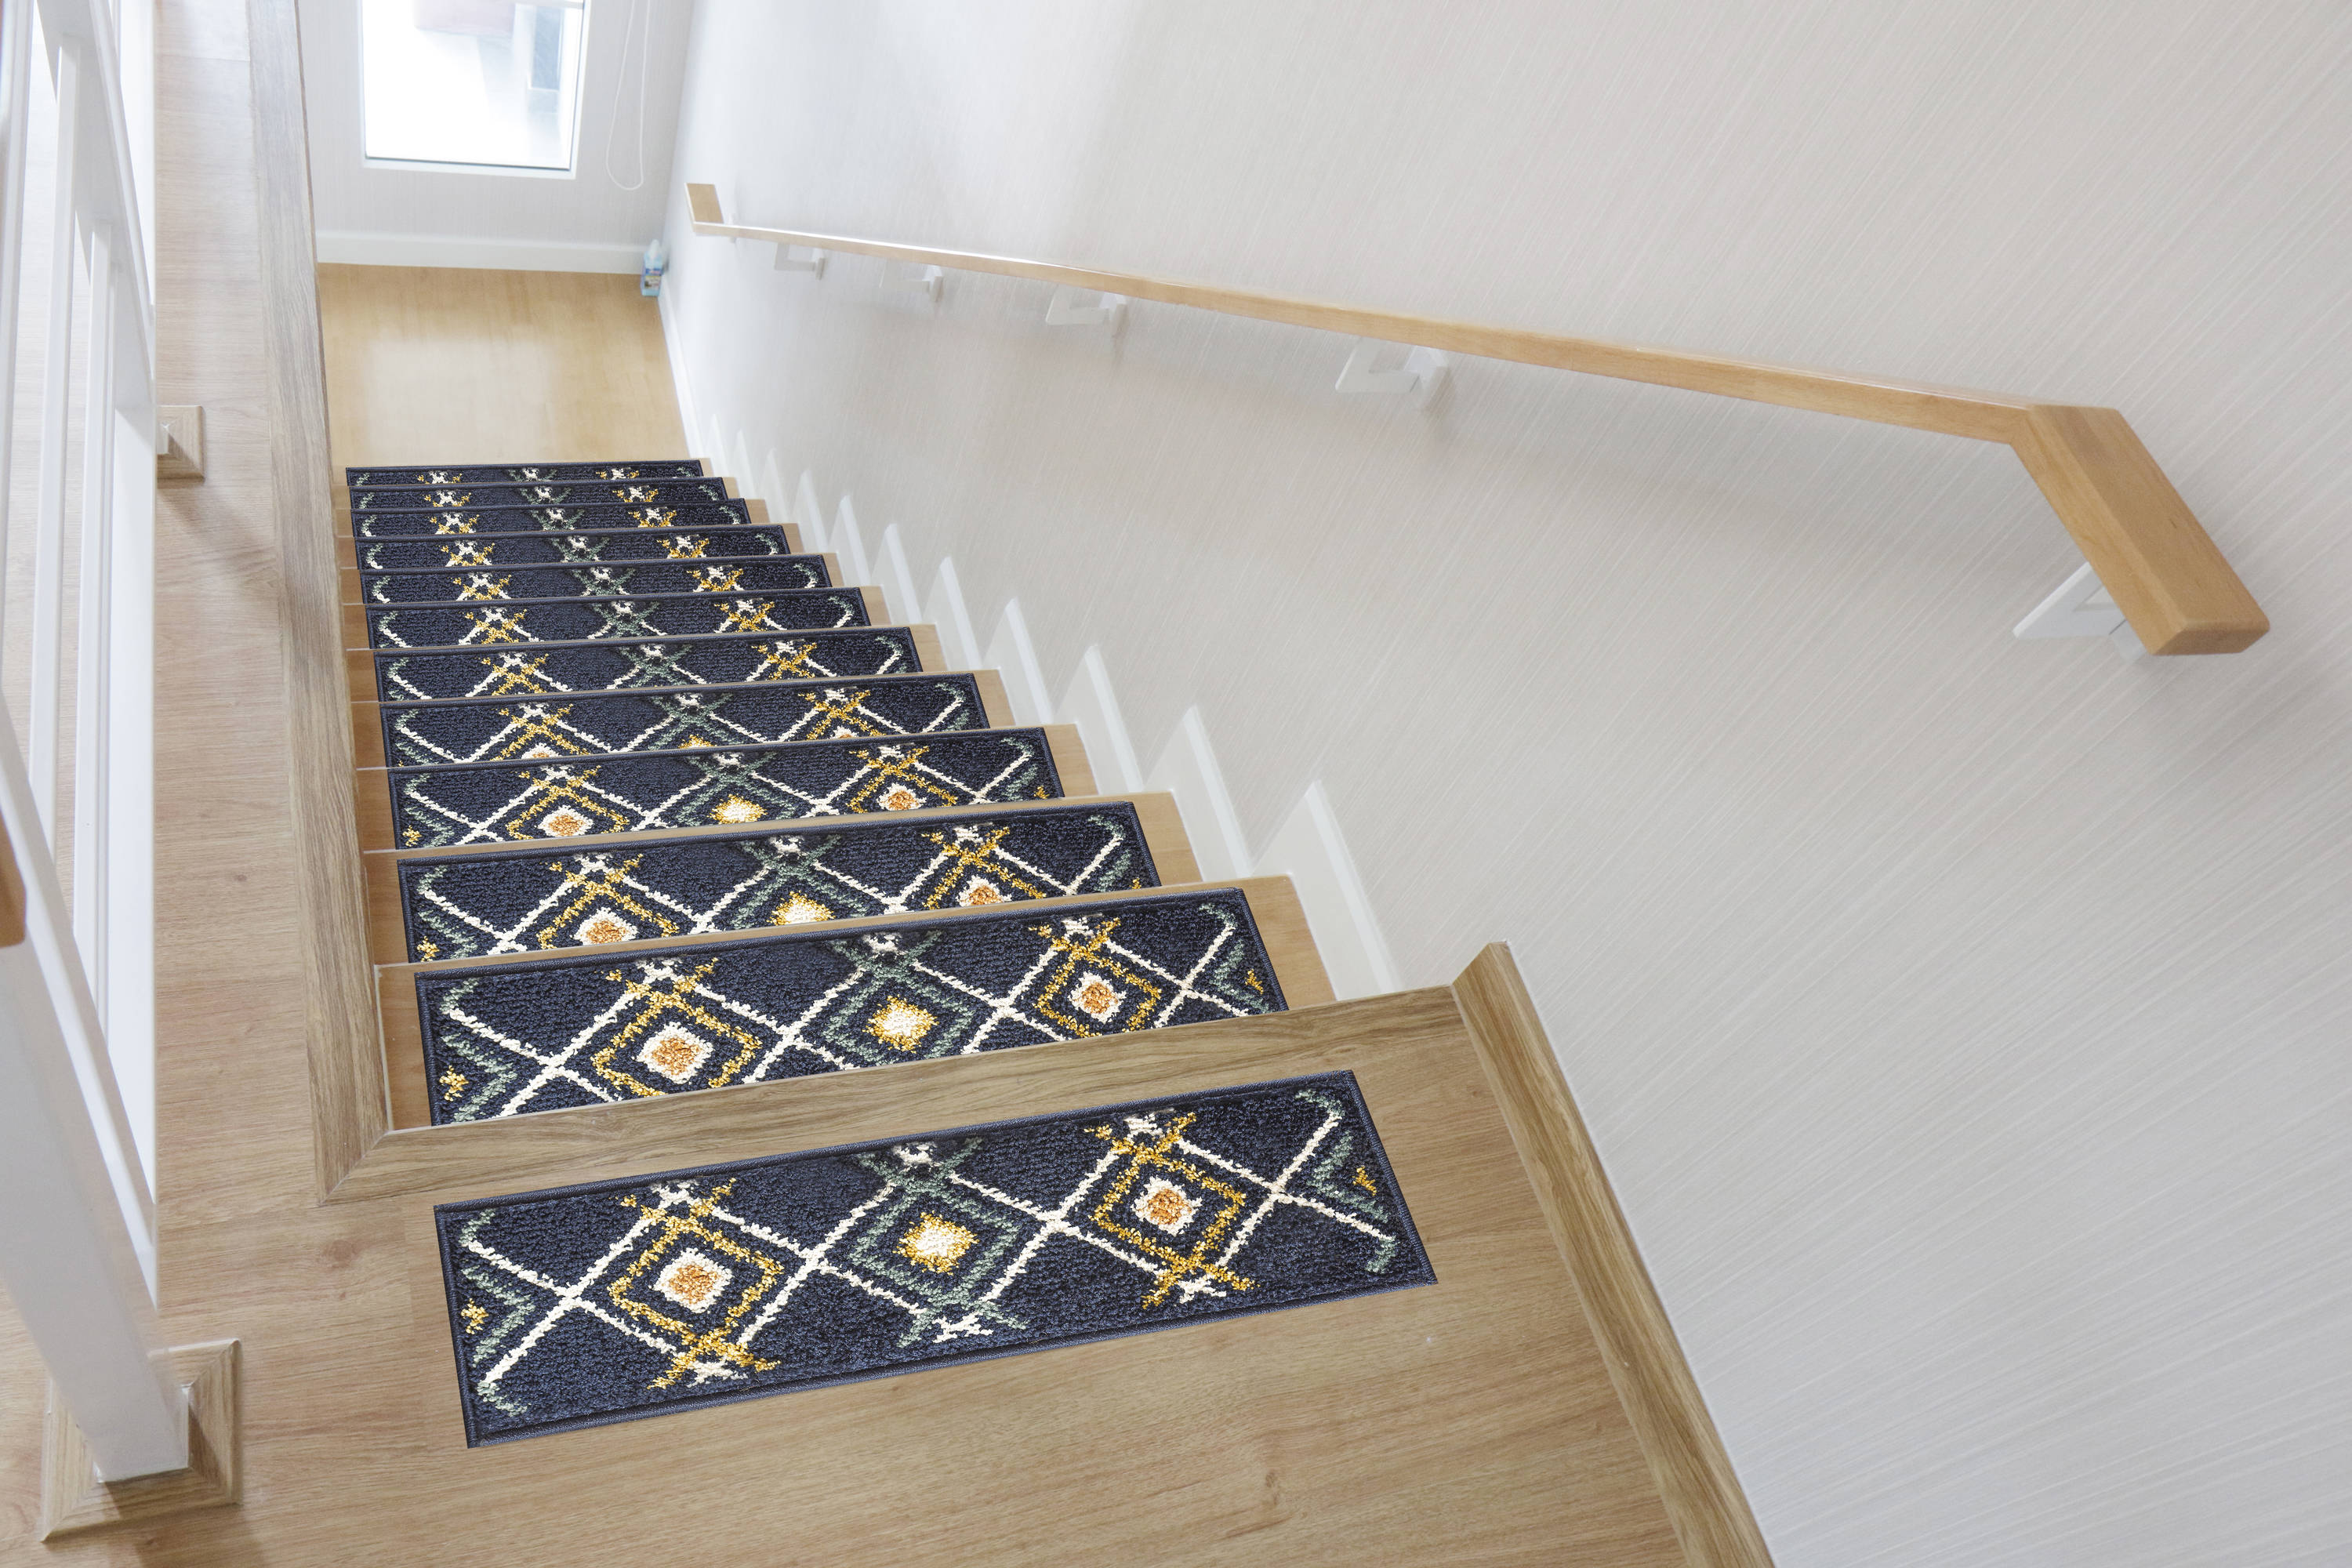 Set 13 Steps Stair Area Rug Treads Carpet Floral Non-slip Staircase Protect BIN 